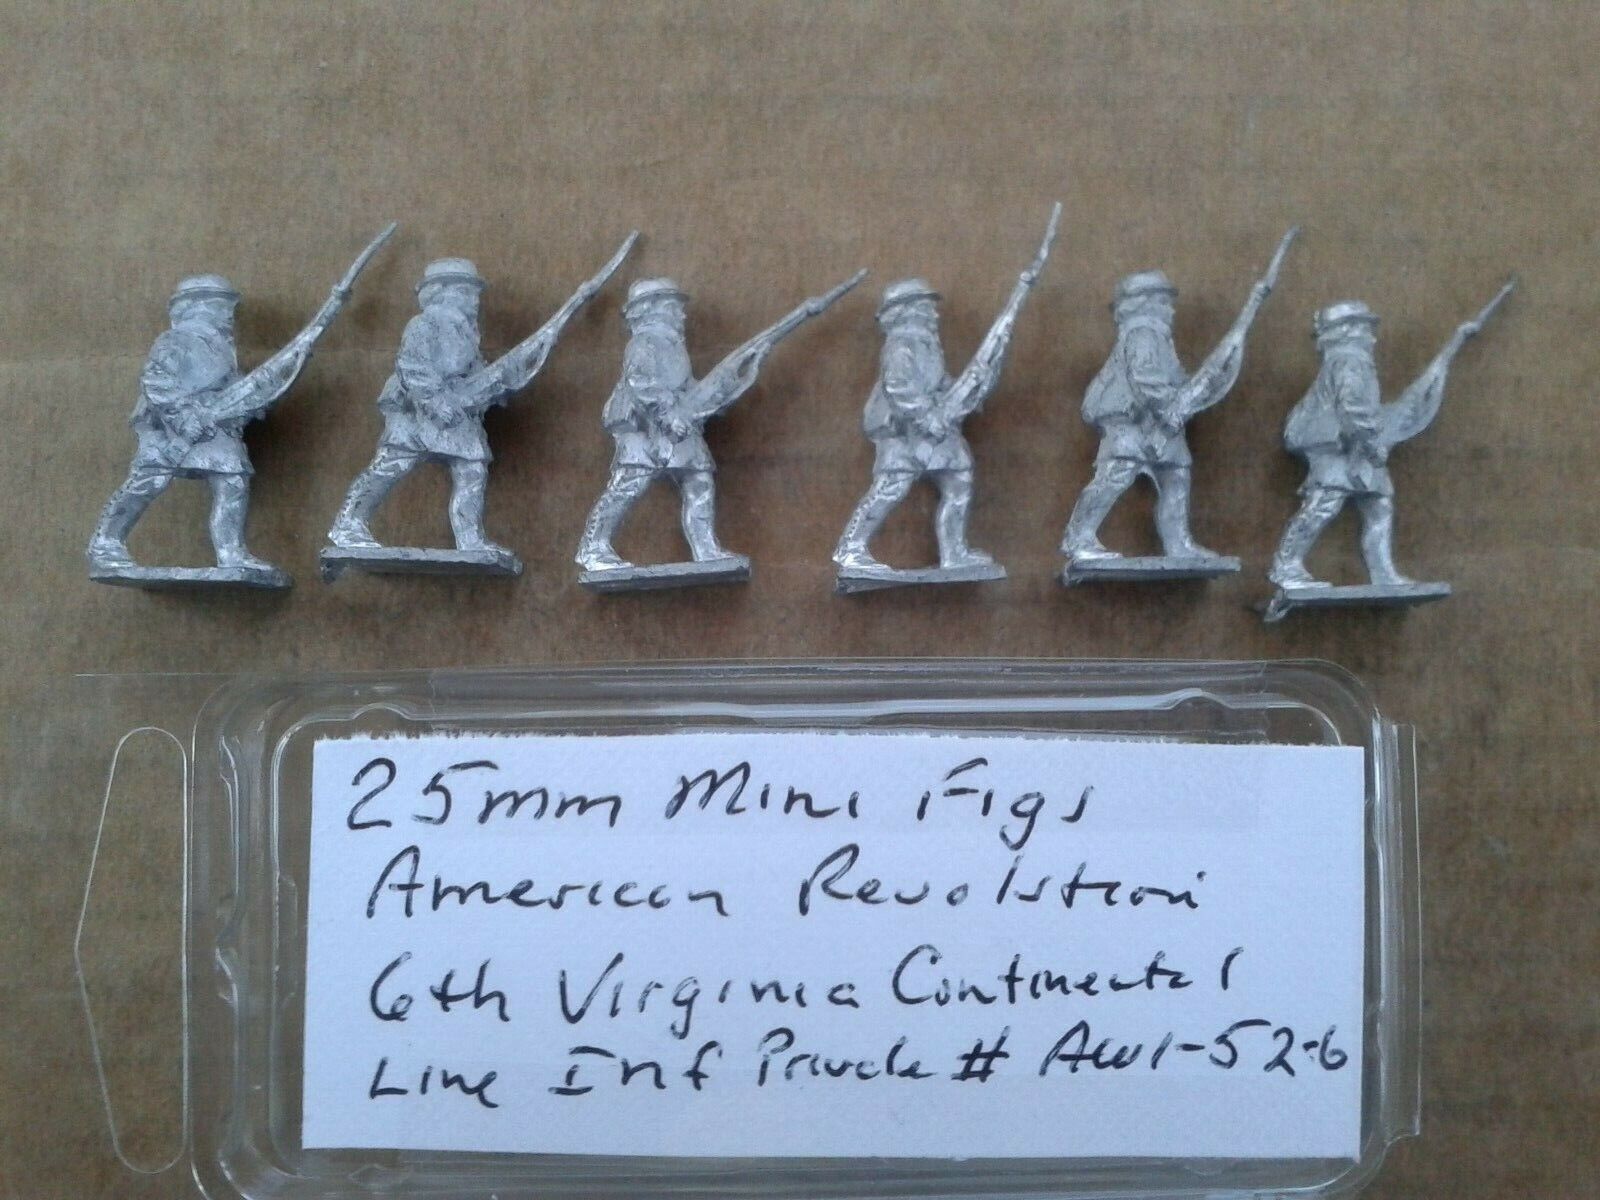 25mm Mini Figs Daily bargain All items in the store sale American revolution Virginia Continental Line 6th